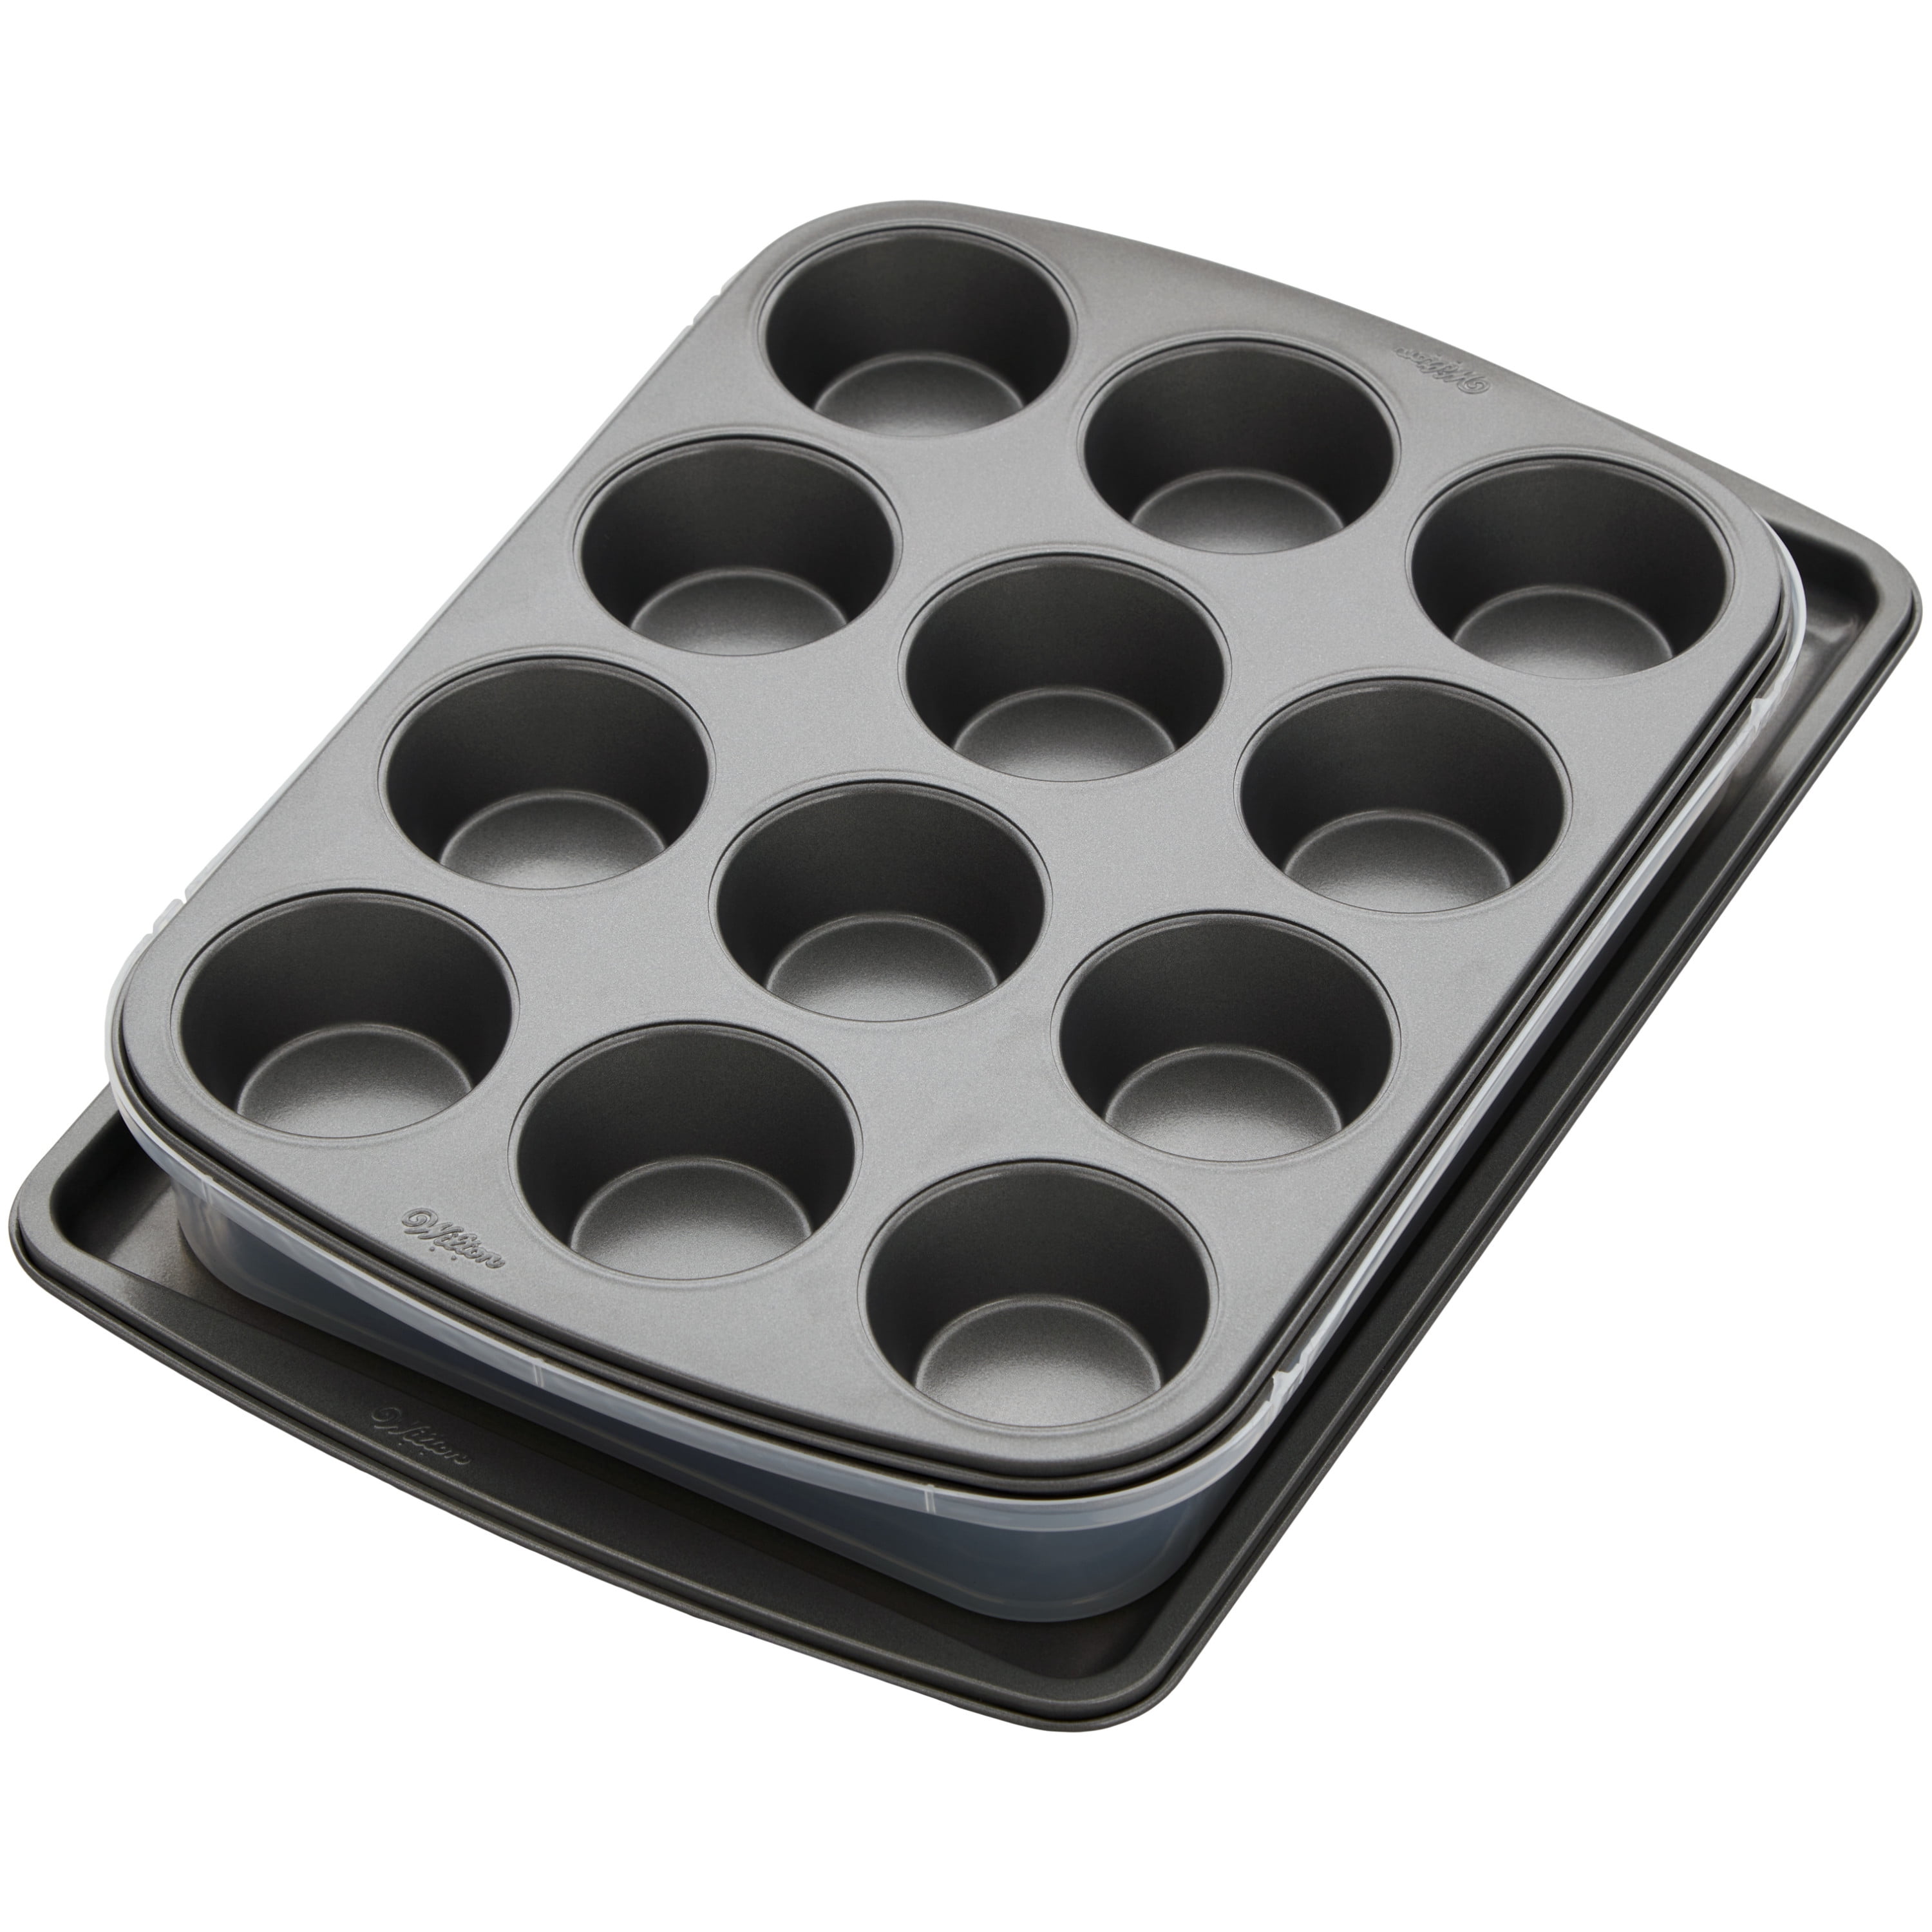 Perfect Results Muffin, Baking and Oblong Pan Bakeware Set, 3-Piece - Wilton